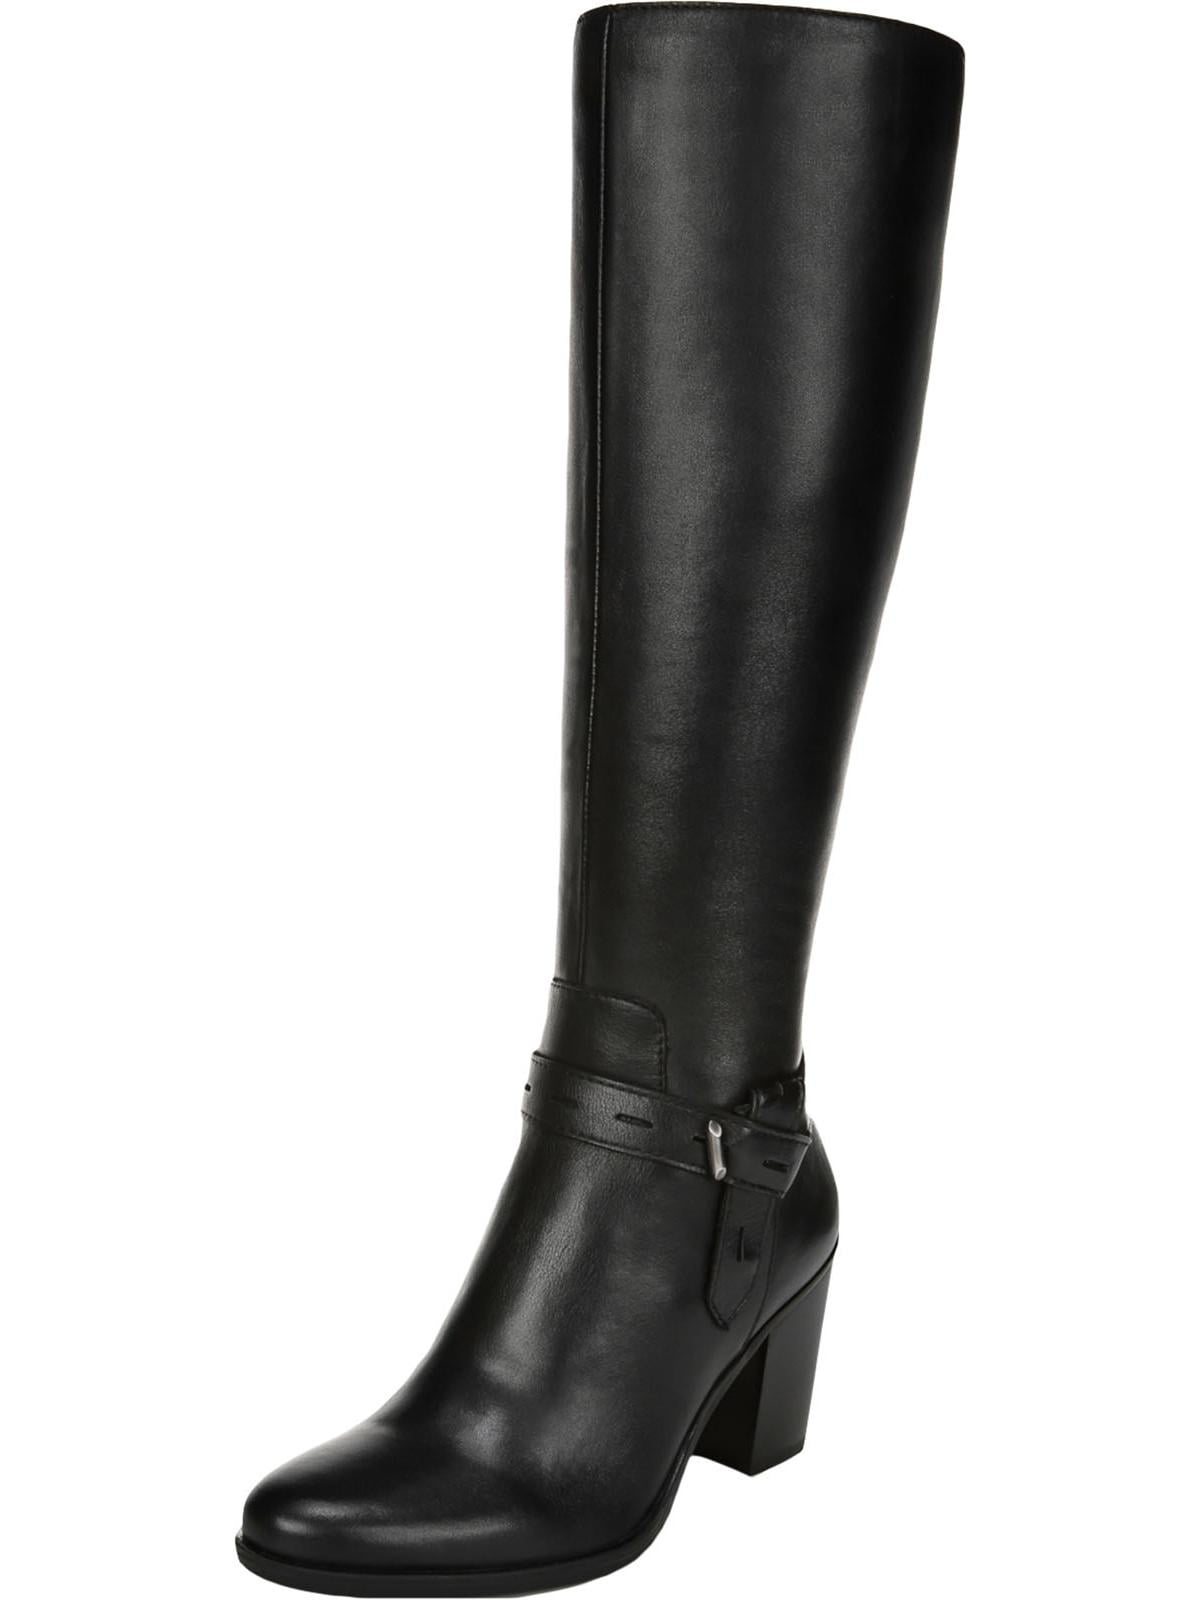 Naturalizer Womens Kamora Leather Knee-High Boots Black 9 Wide (C,D,W ...